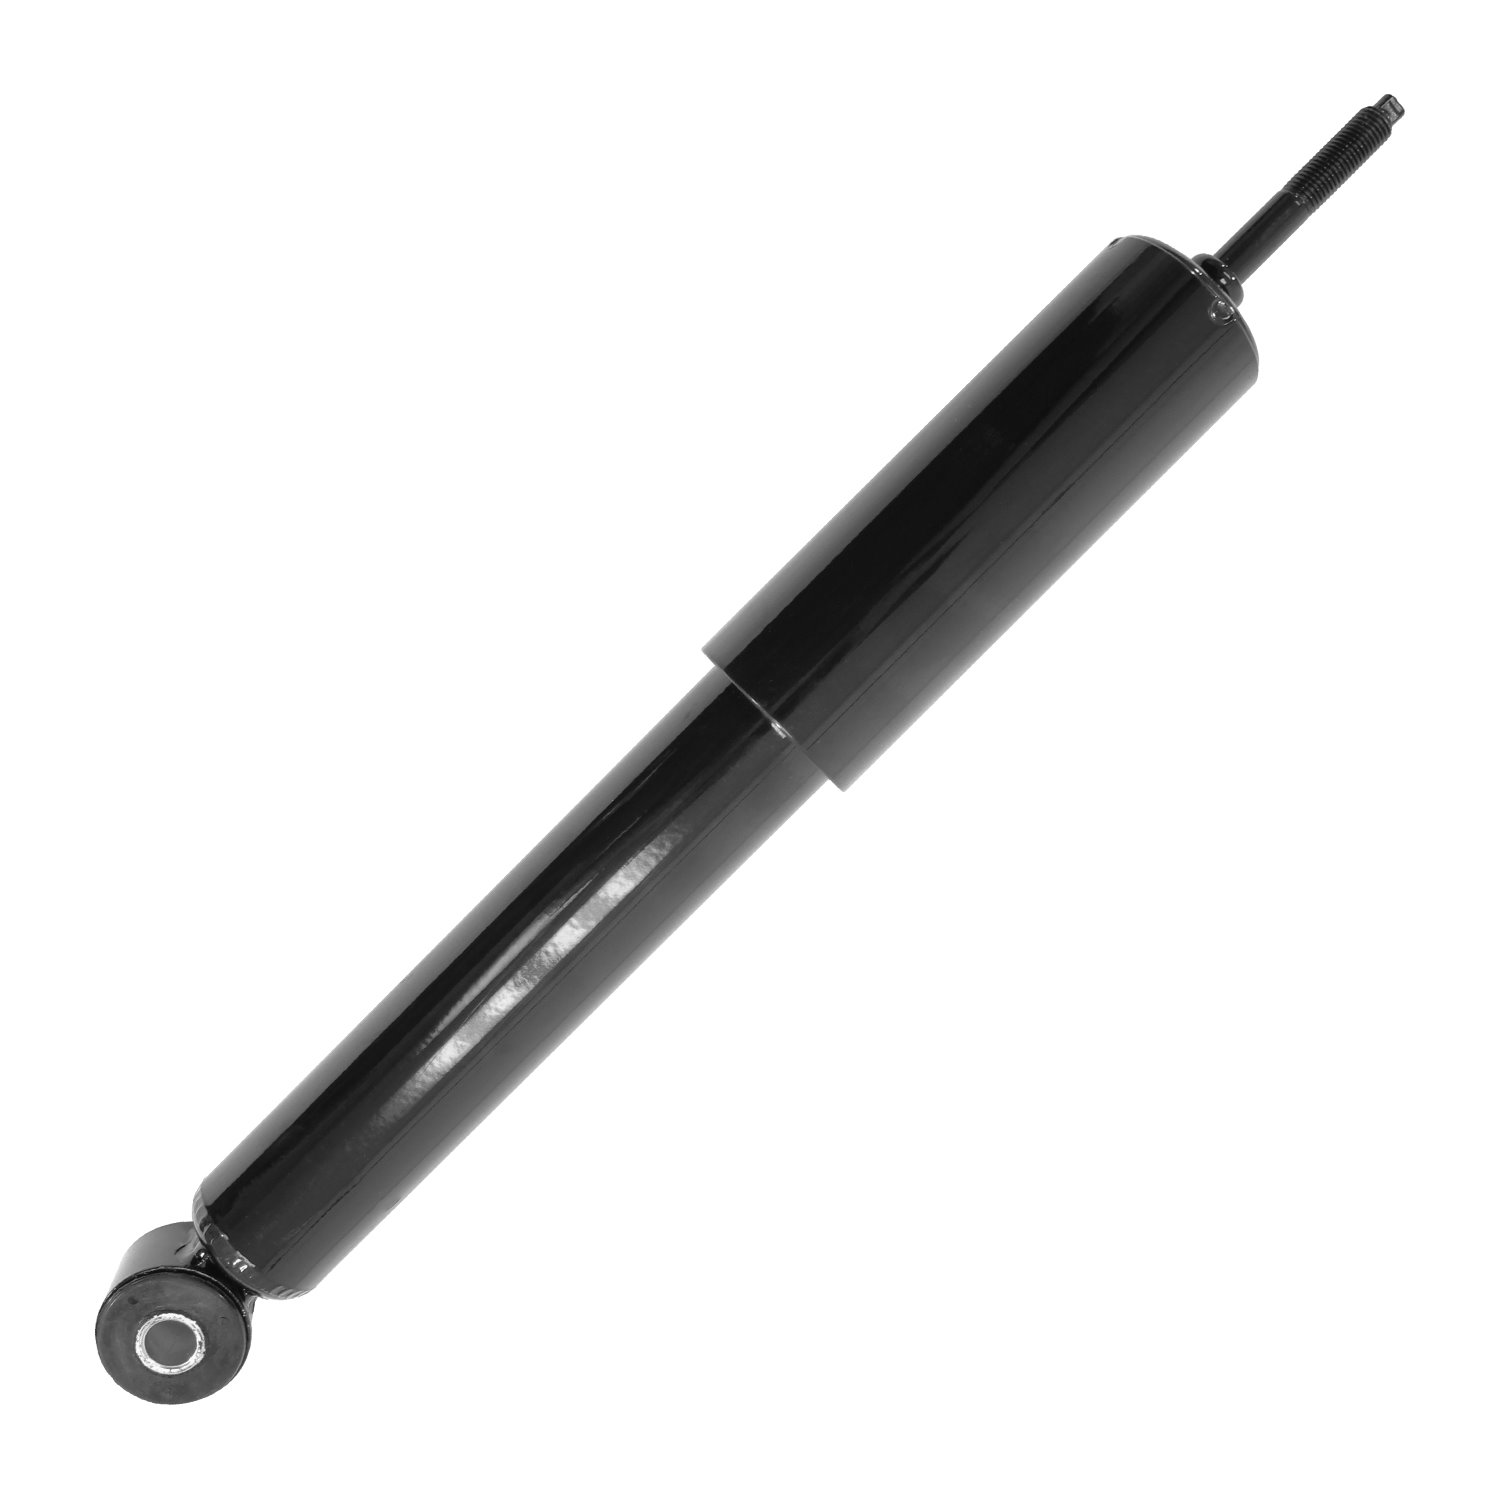 215110 Gas Charged Shock Absorber Fits Select Multiple Make/Models